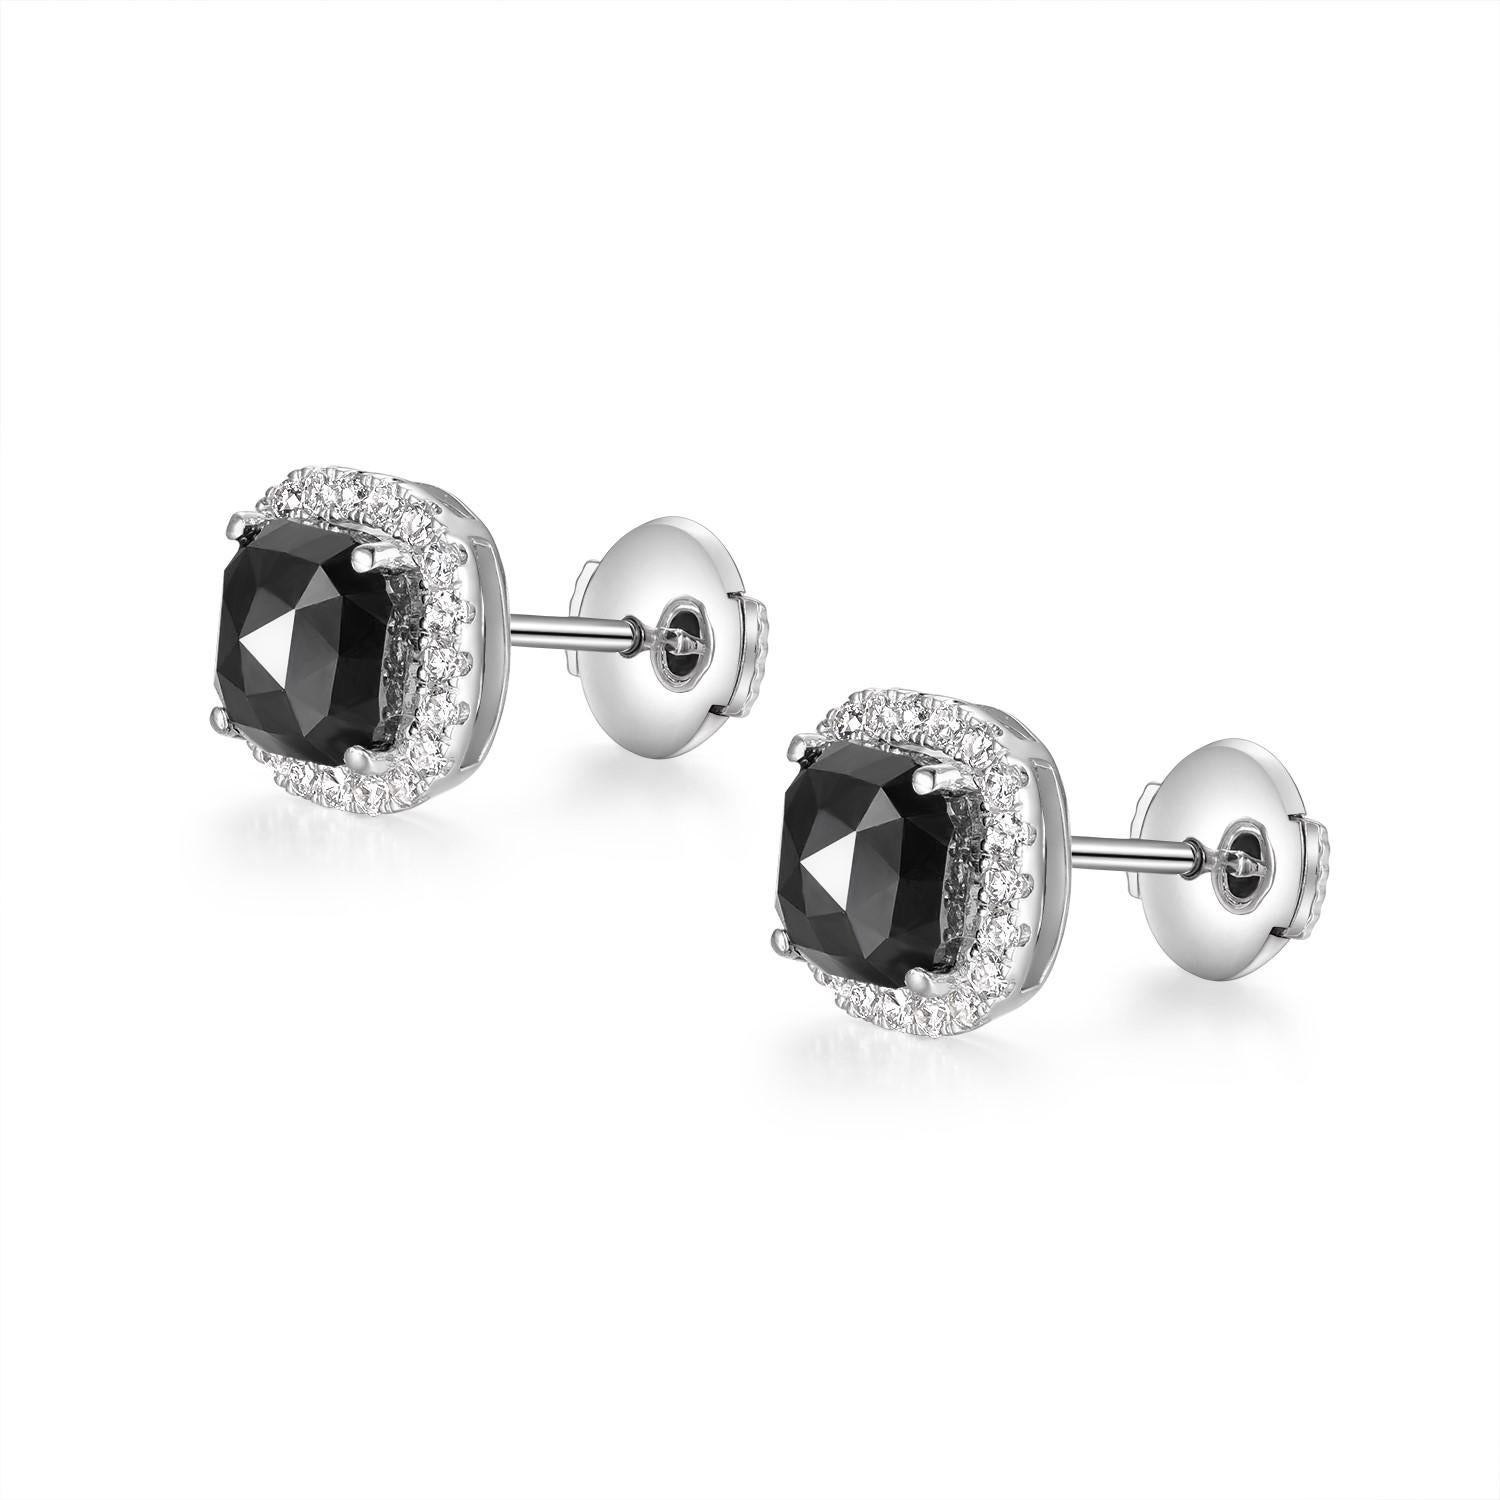 These exquisite stud earrings showcase the unique allure of rose-cut black diamonds, each weighing 1.83 carats, set in a luxurious 14K white gold. The central black diamonds exude a sophisticated charm, their multifaceted rose cut enhancing the